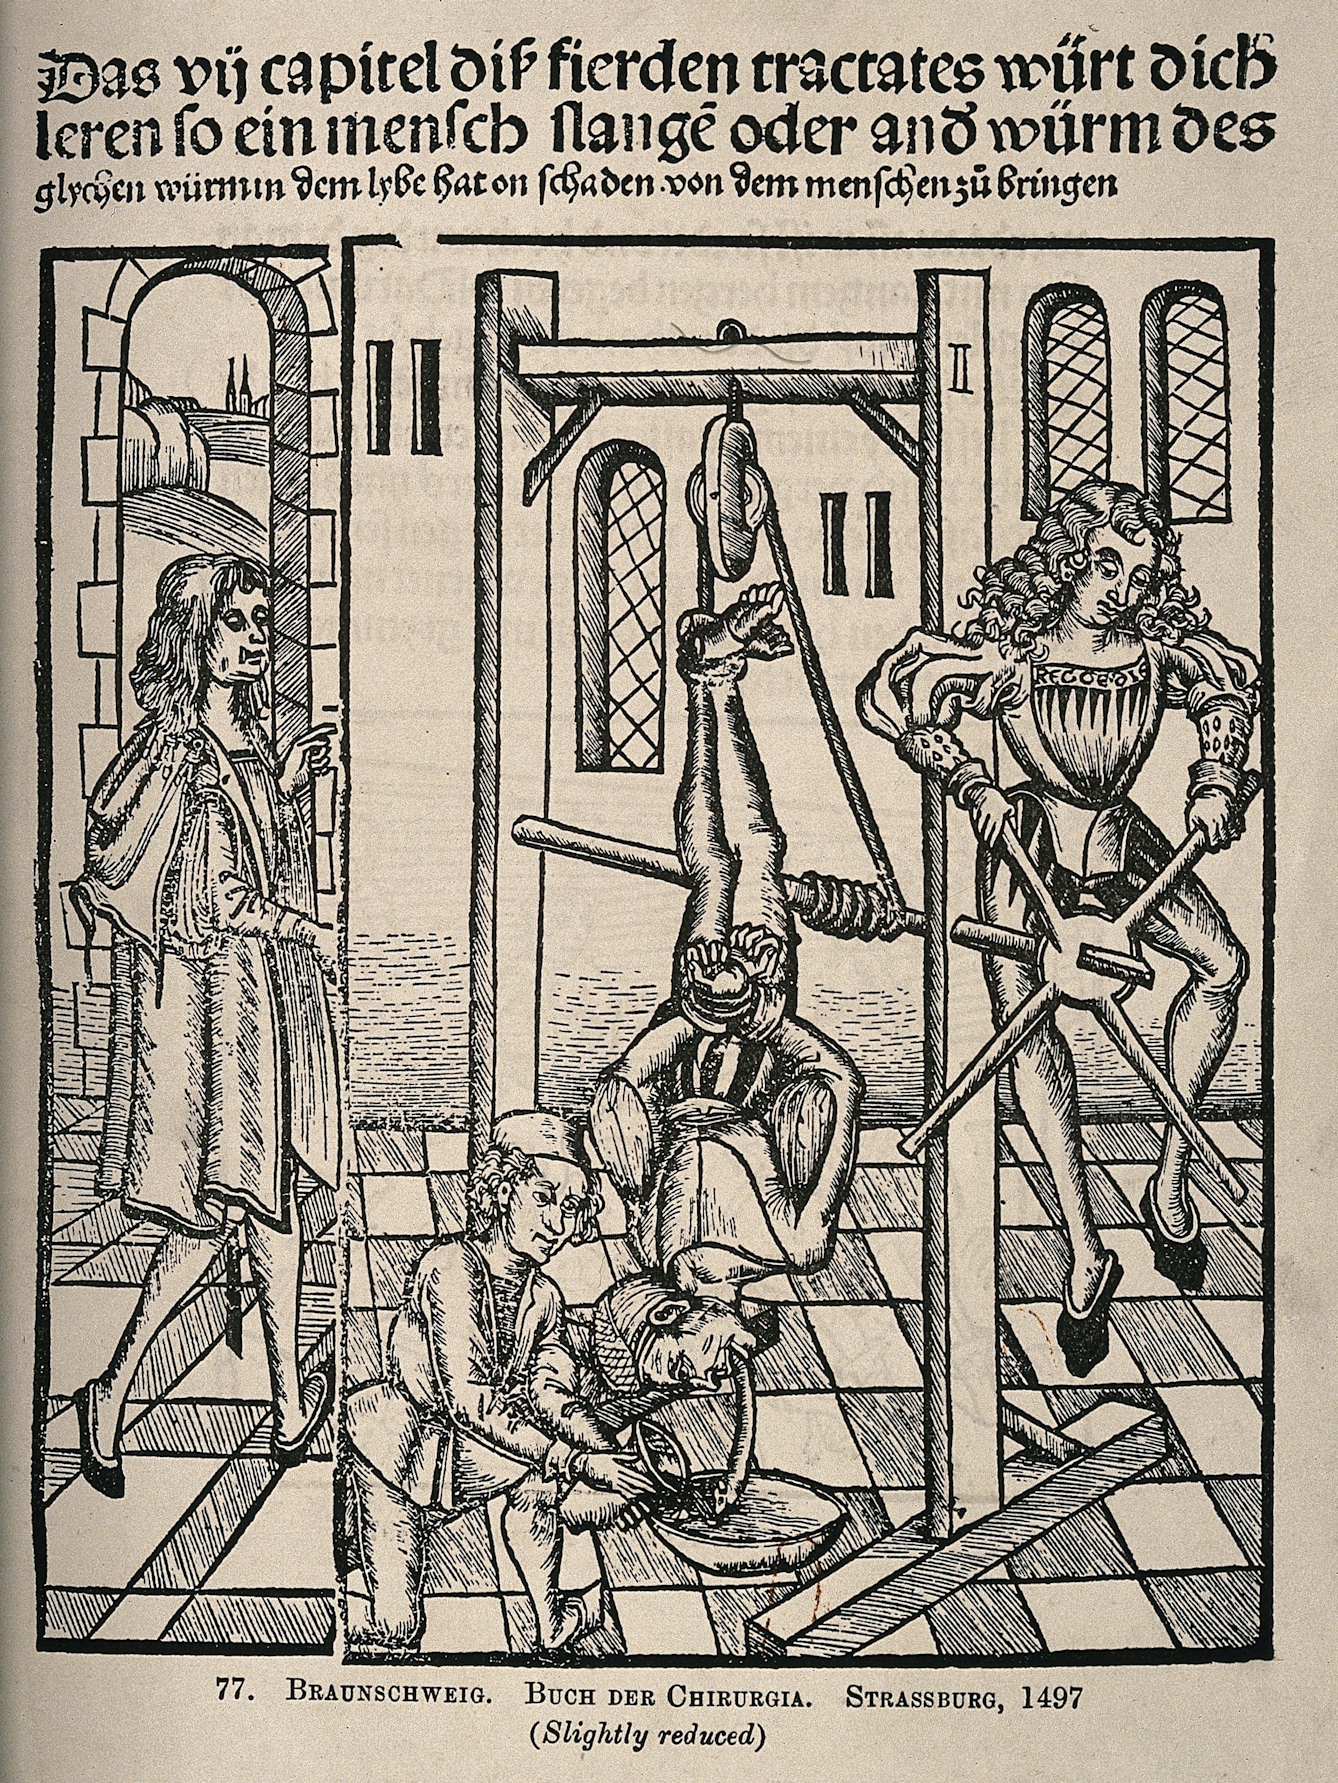 15th-century woodcut showing a man supervising two assistants, one of which is pouring liquid onto the worm emitting from the patient's mouth (the patient is hanging upside-down from a contraption), the other is turning the rope of the apparatus to tighten the grip on the patient